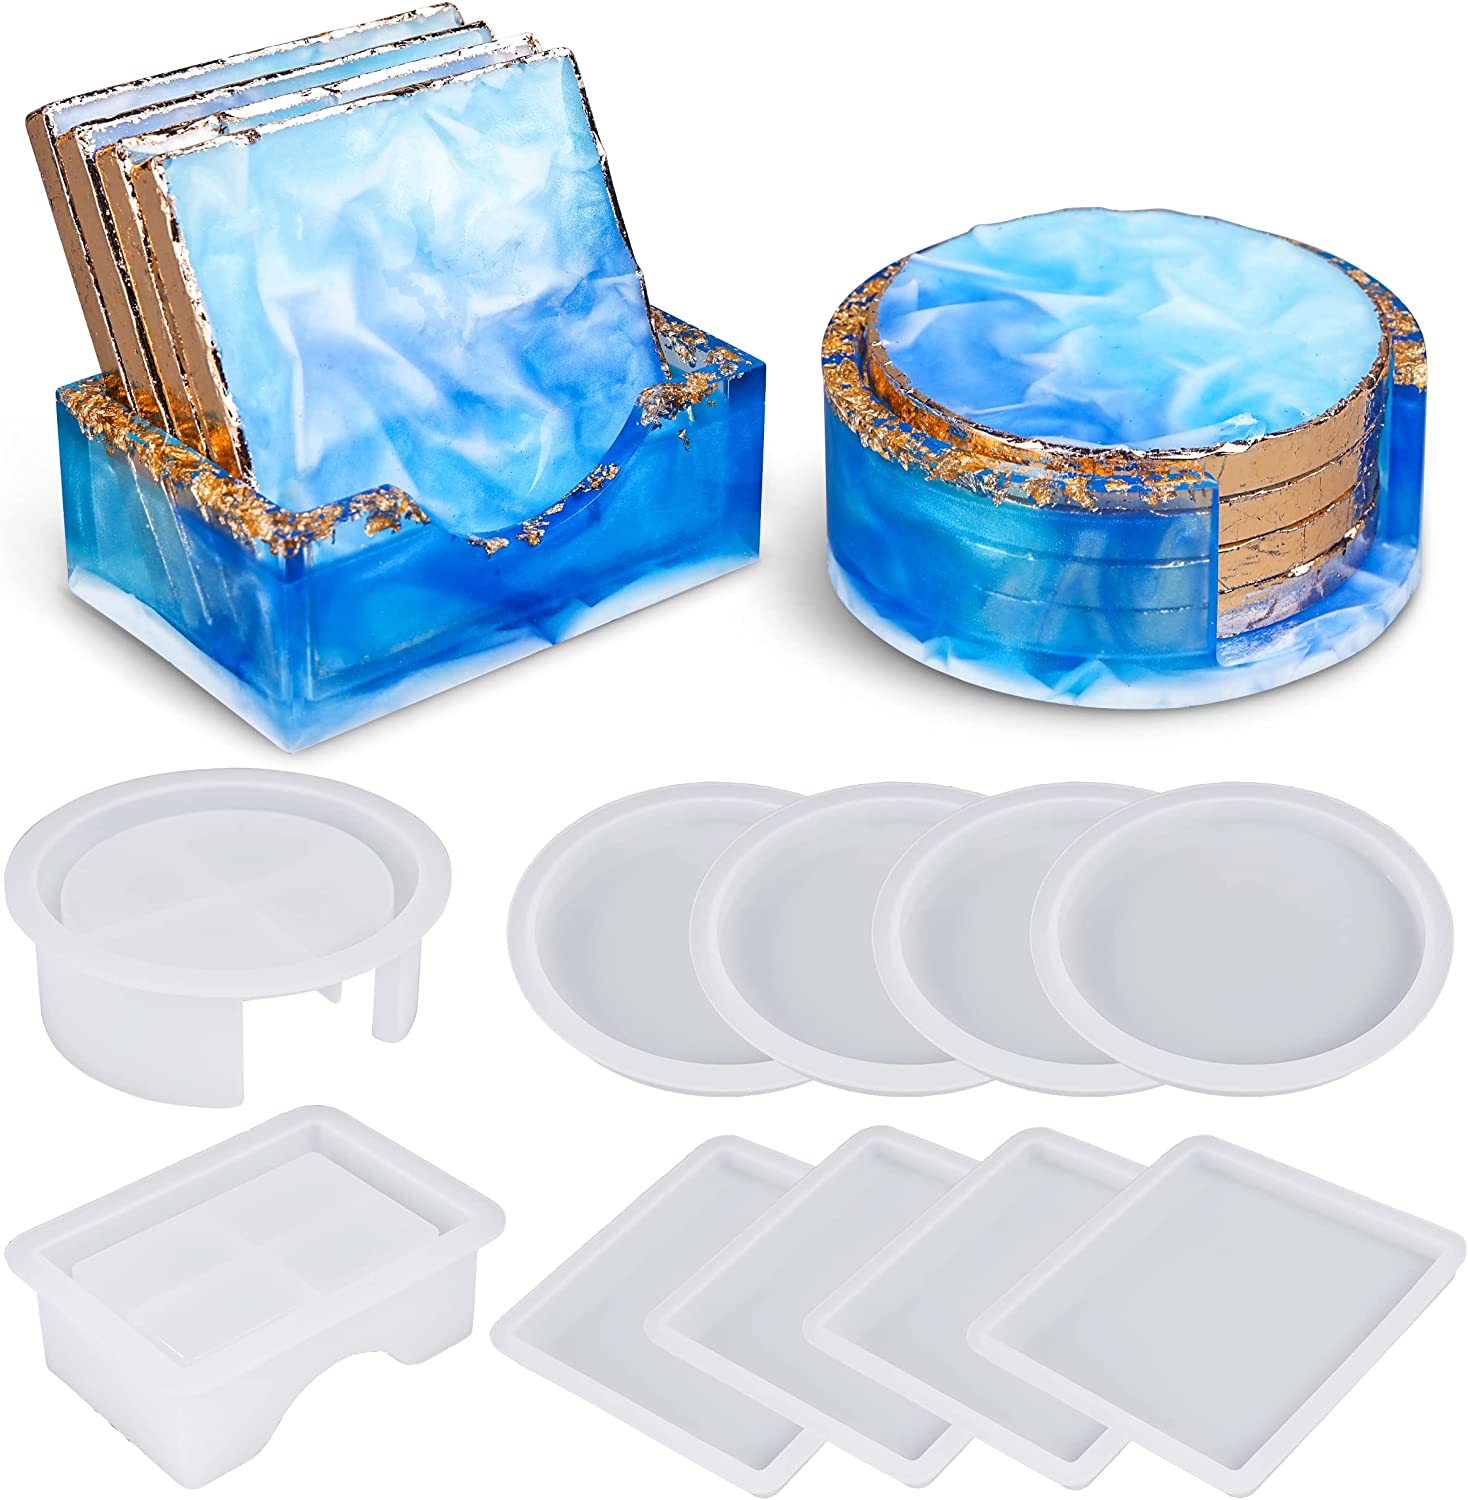 Resin Coaster Silicone Molds for Sale in Las Vegas, NV - OfferUp